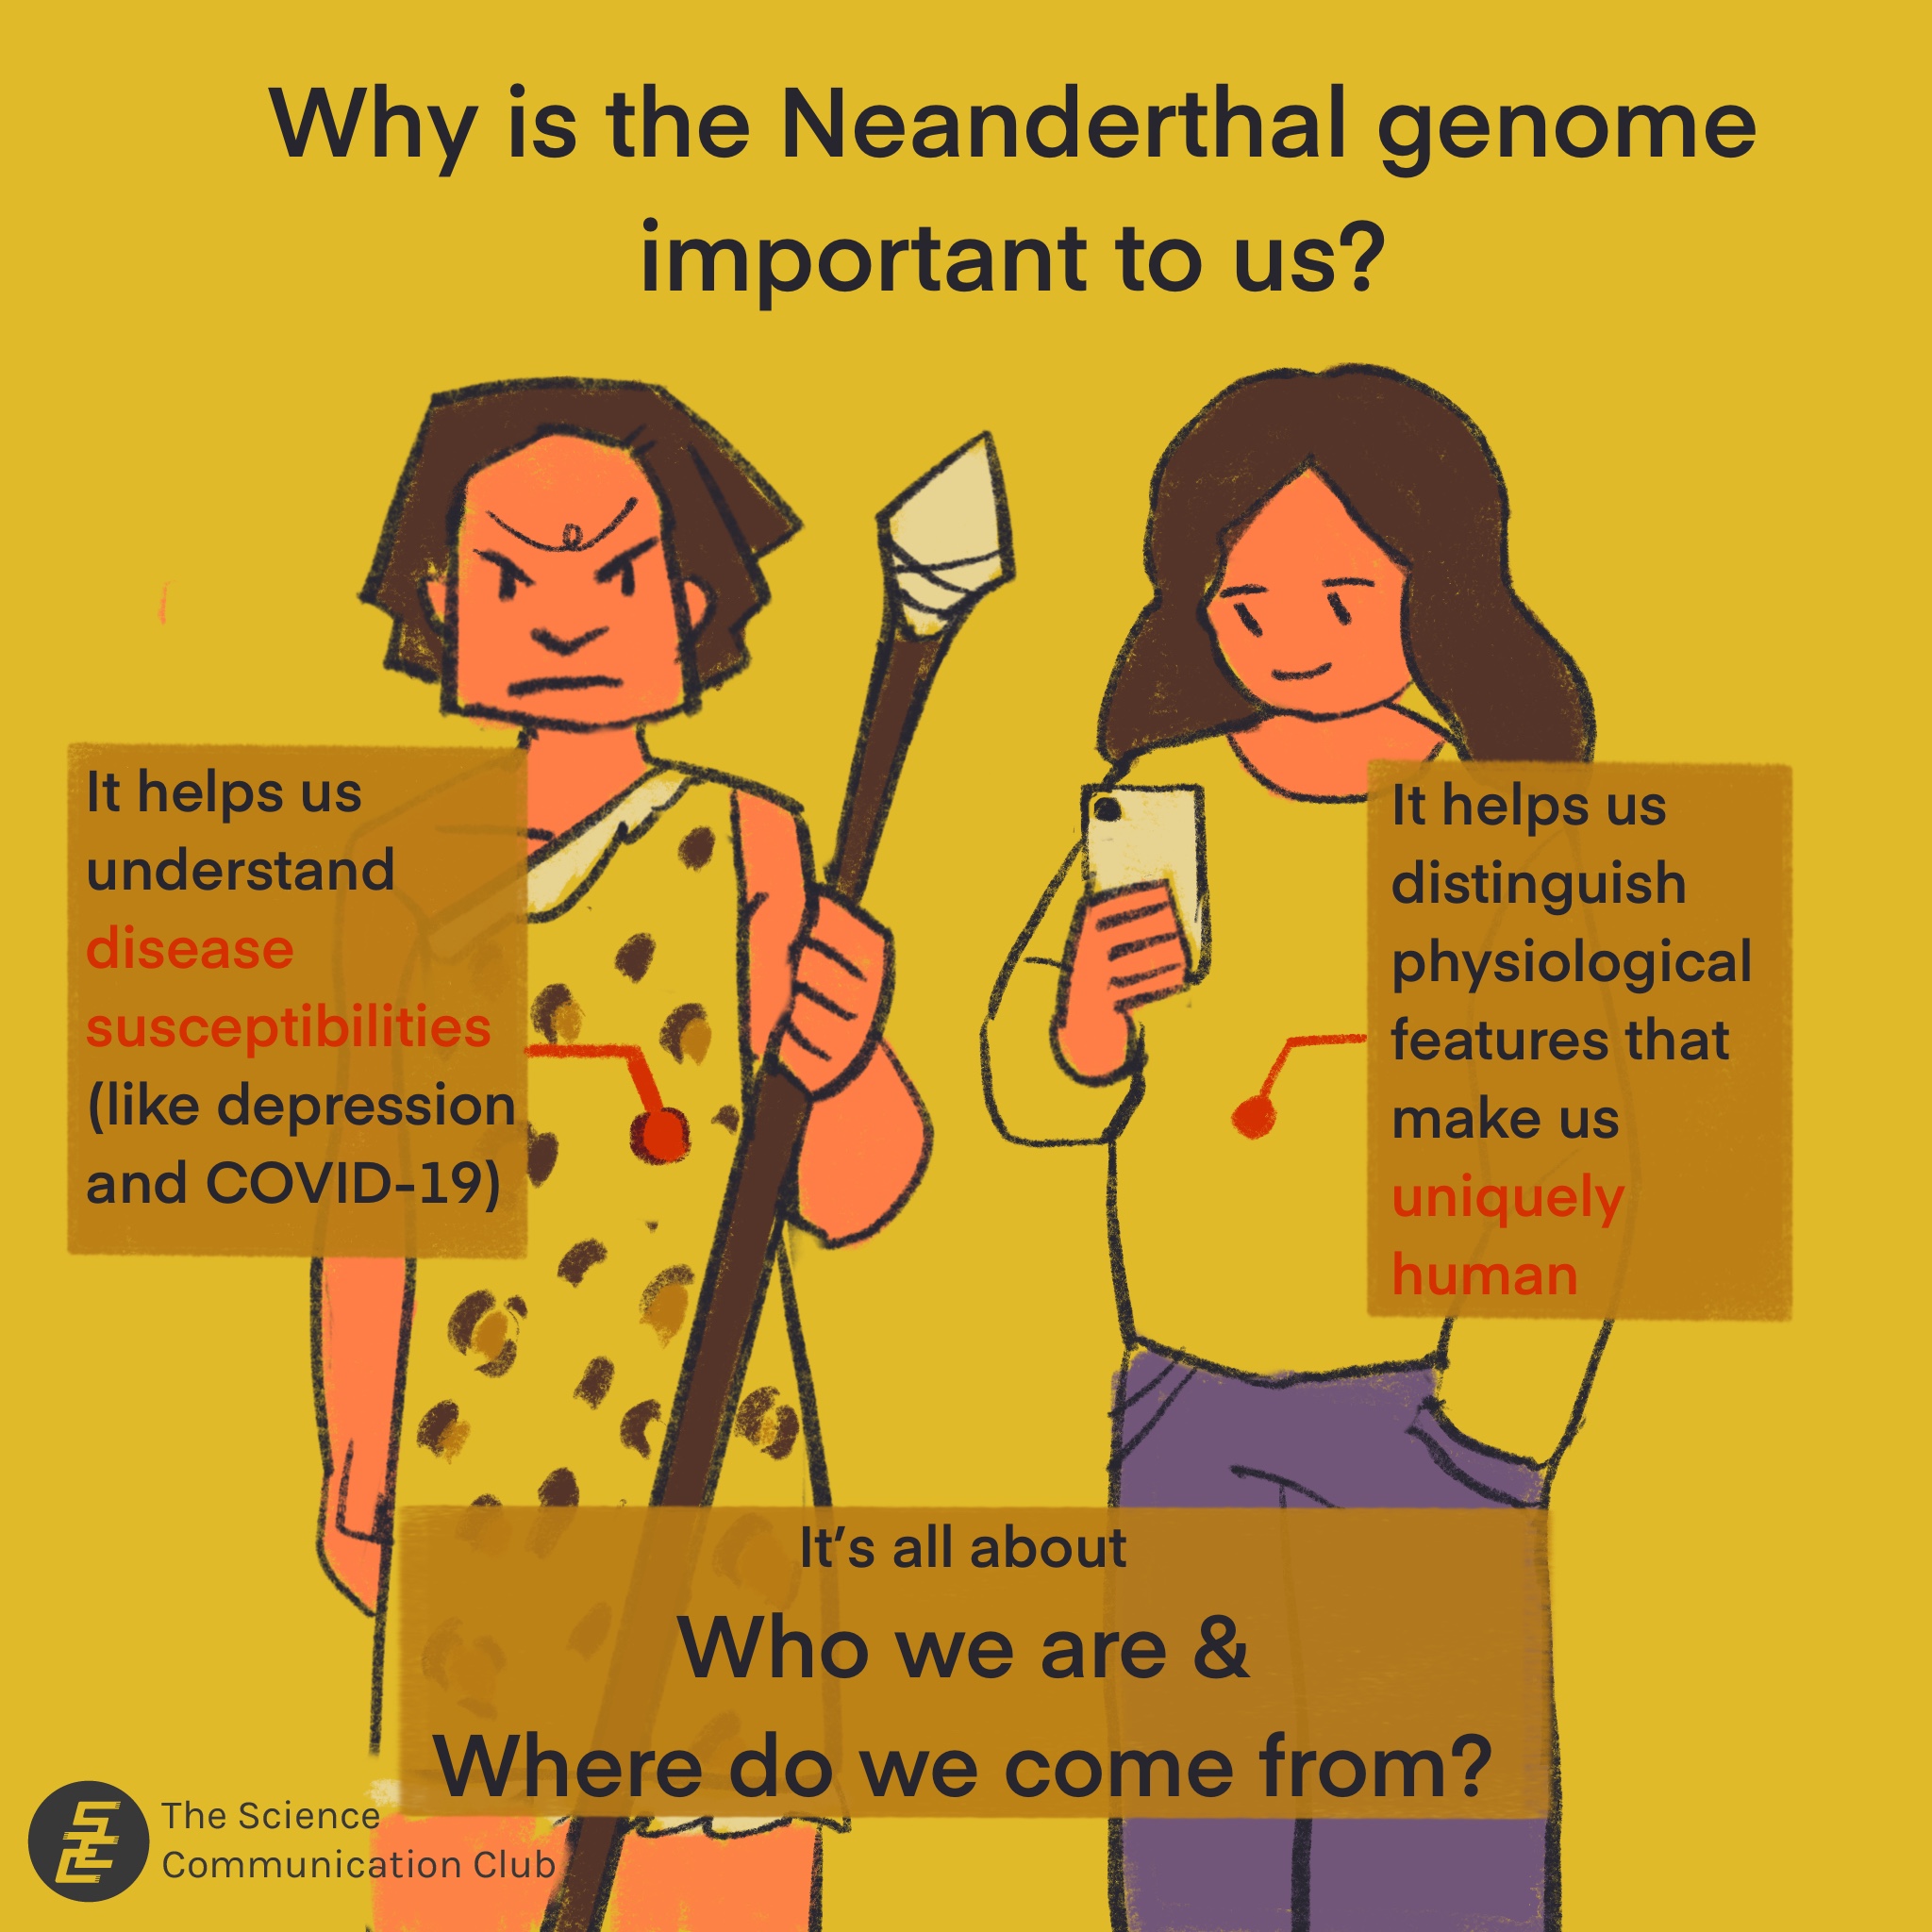 An illustration of an Neanderthal and a modern-day female standing next to each other. Text: Why is the Neanderthal genome important to us? It helps us understand disease susceptibilities (like depression and COVID-19). It helps us distinguish physiological features that make us uniquely human. Its all about who we are, and where do we come from.